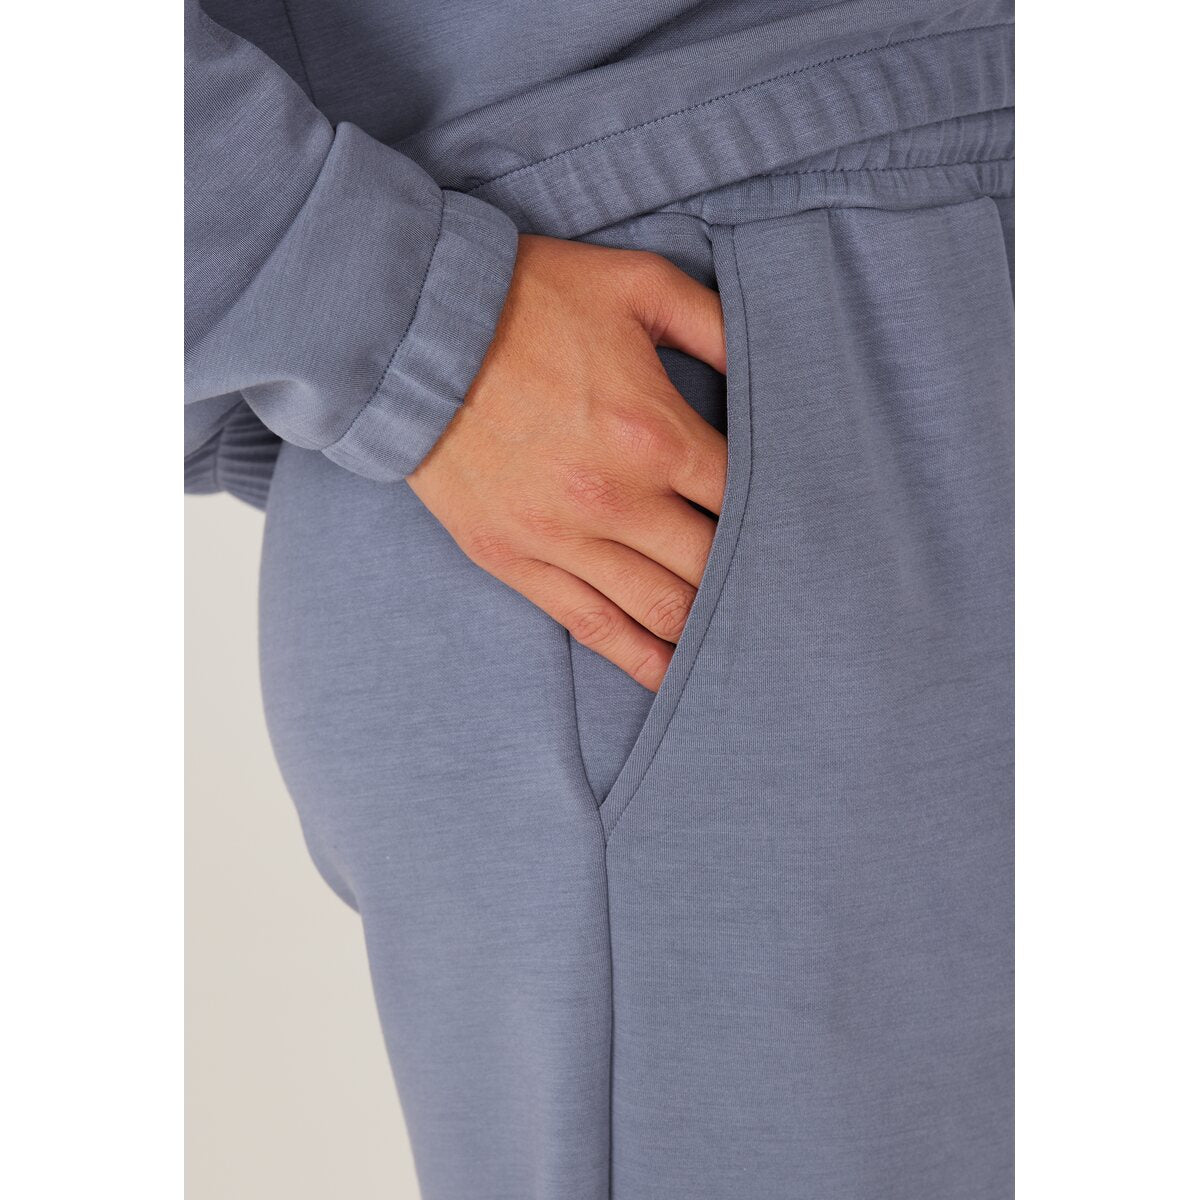 Athlecia Jacey V2 Womenswear Sweat Pants 8 Shaws Department Stores